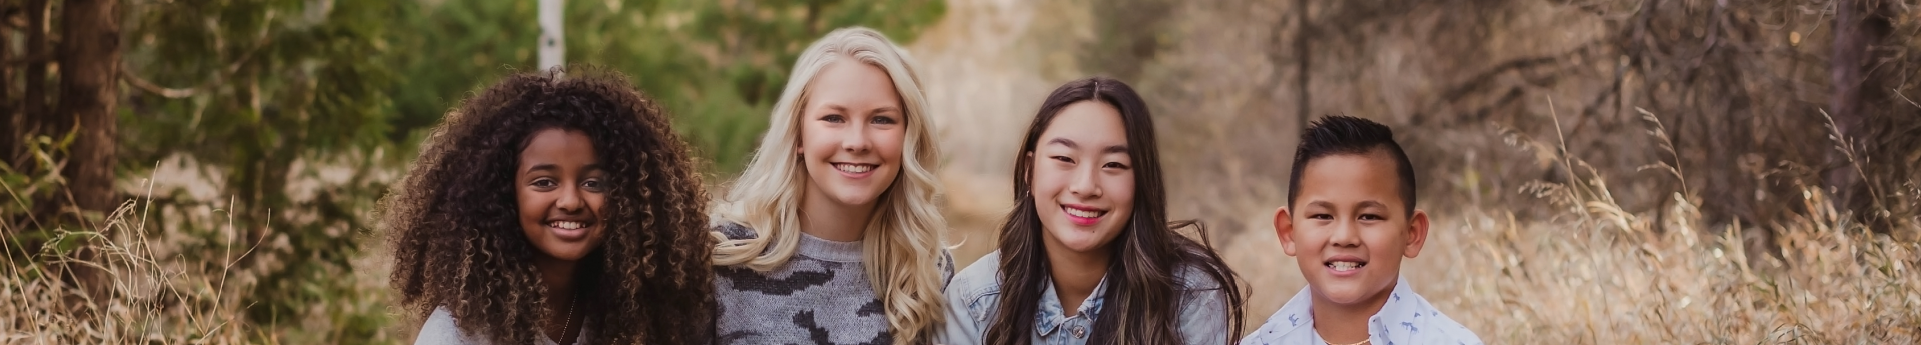 Multiracial and multicultural teen siblings smile for family photo